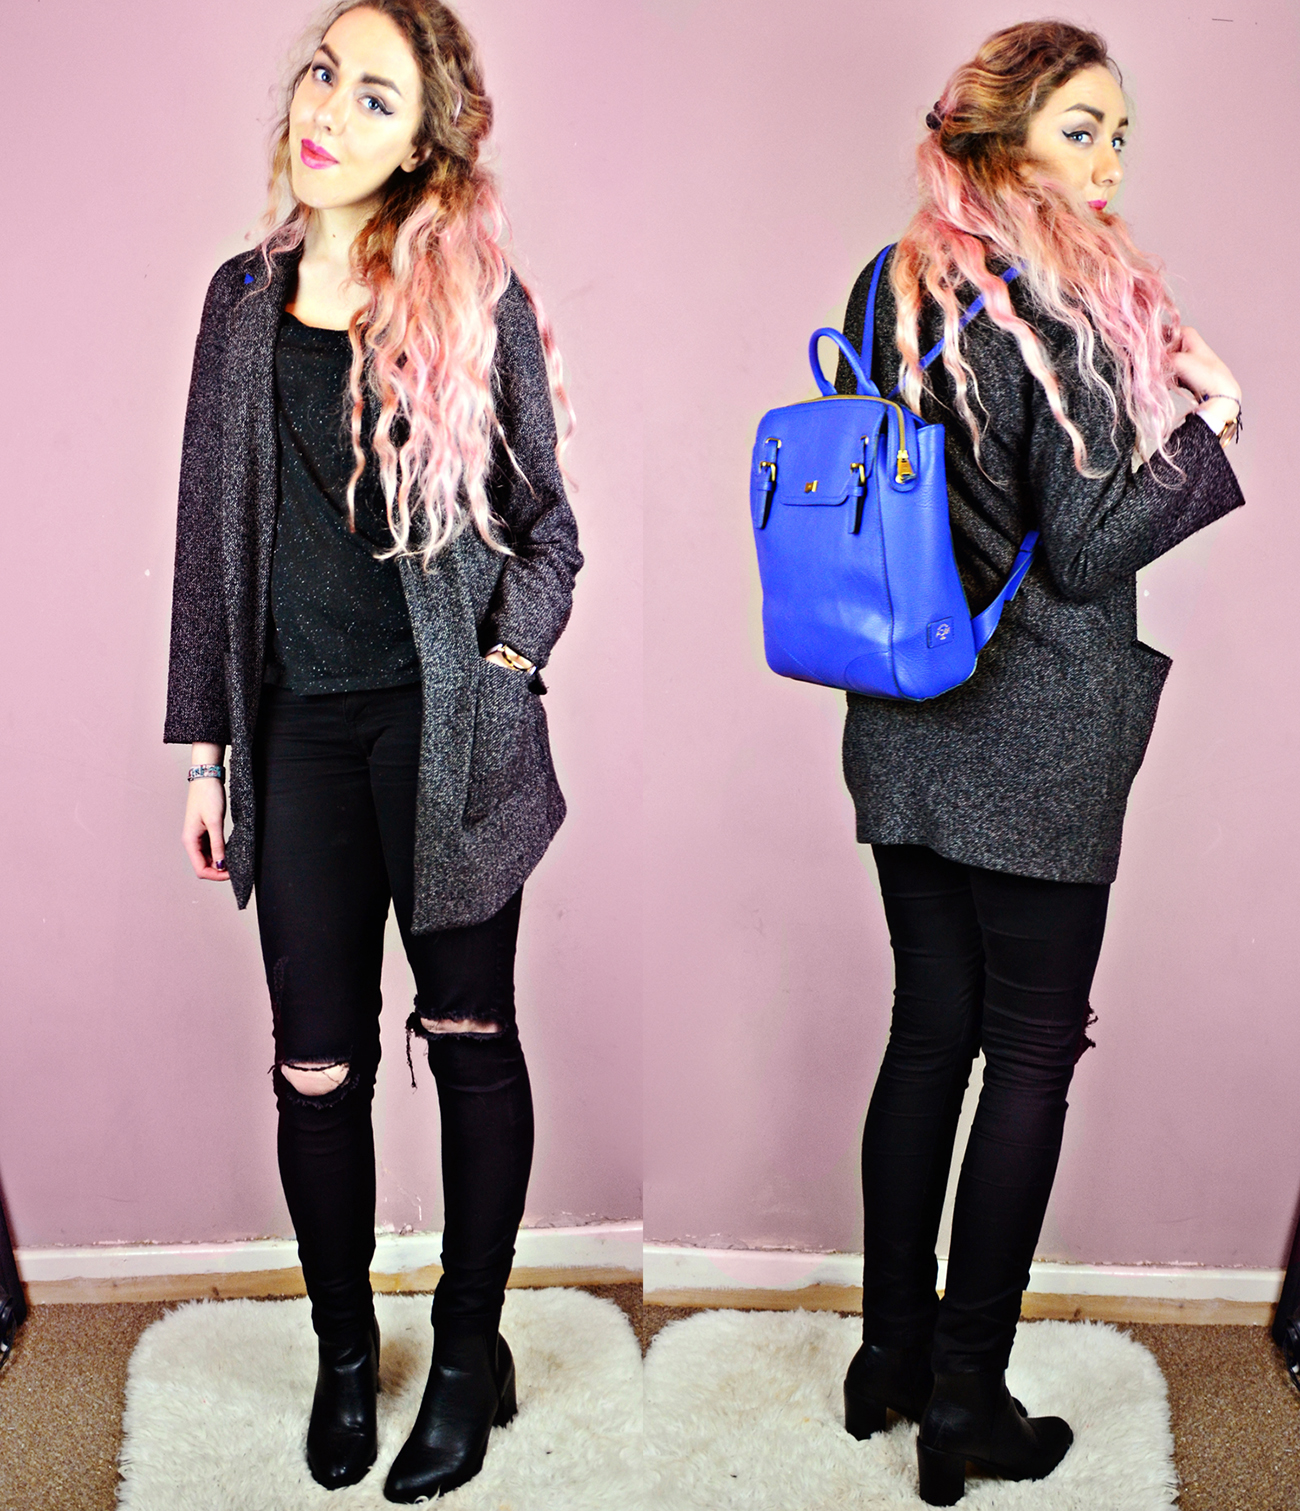 Backpack*// Nica Handbags Jacket// River Island (old) (similar) Speckled Boyfriend Tee// New Look (similar) Ripped Jeans*// Quiz Pointed Boots*// Boohoo Stephi LaReine, Style Blogger pink hair